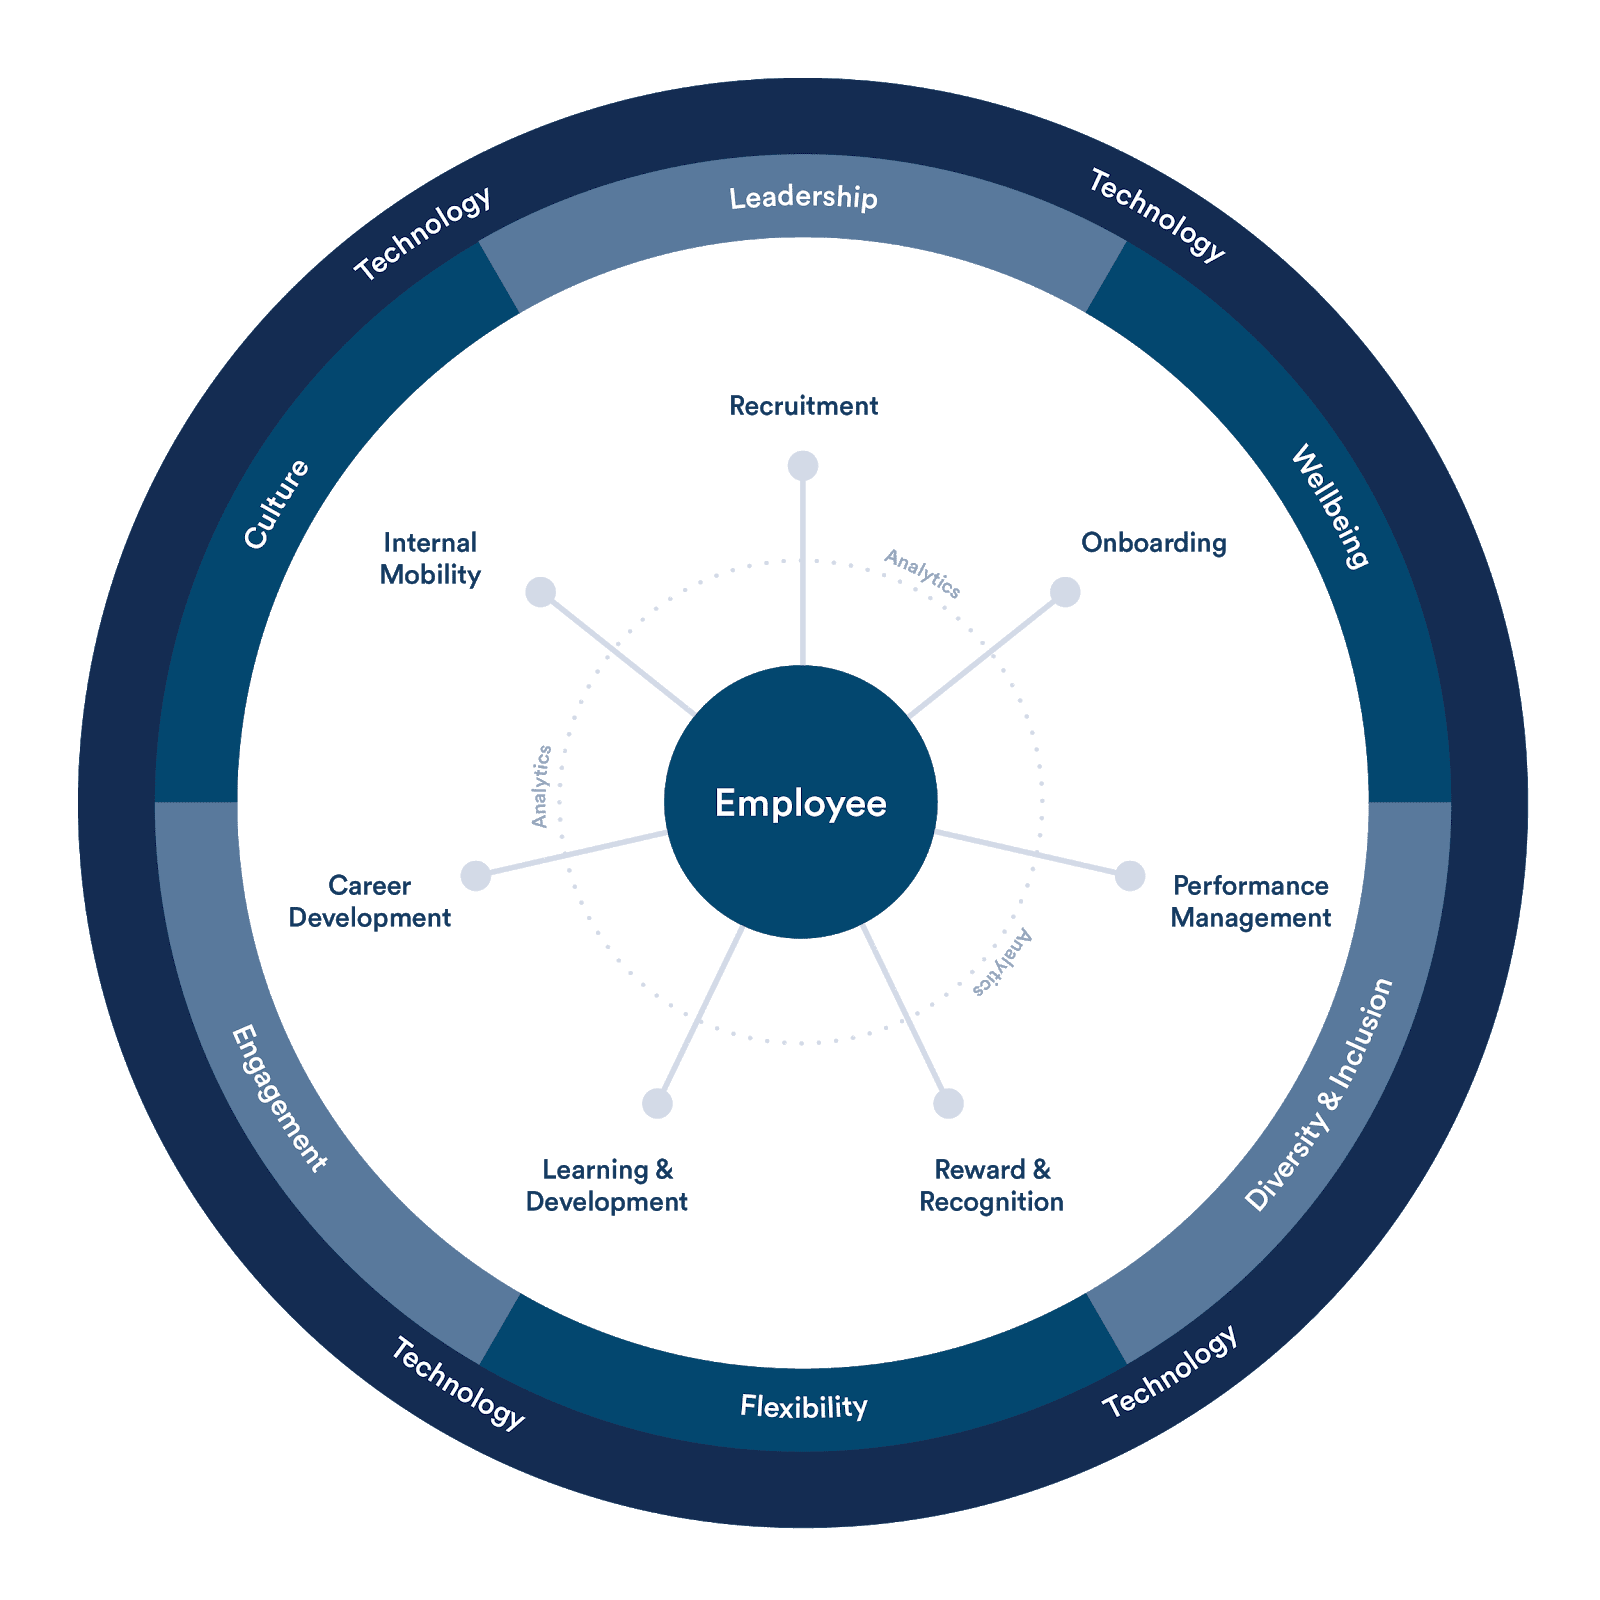 The PageUp Talent Management Framework puts the employee at the centre